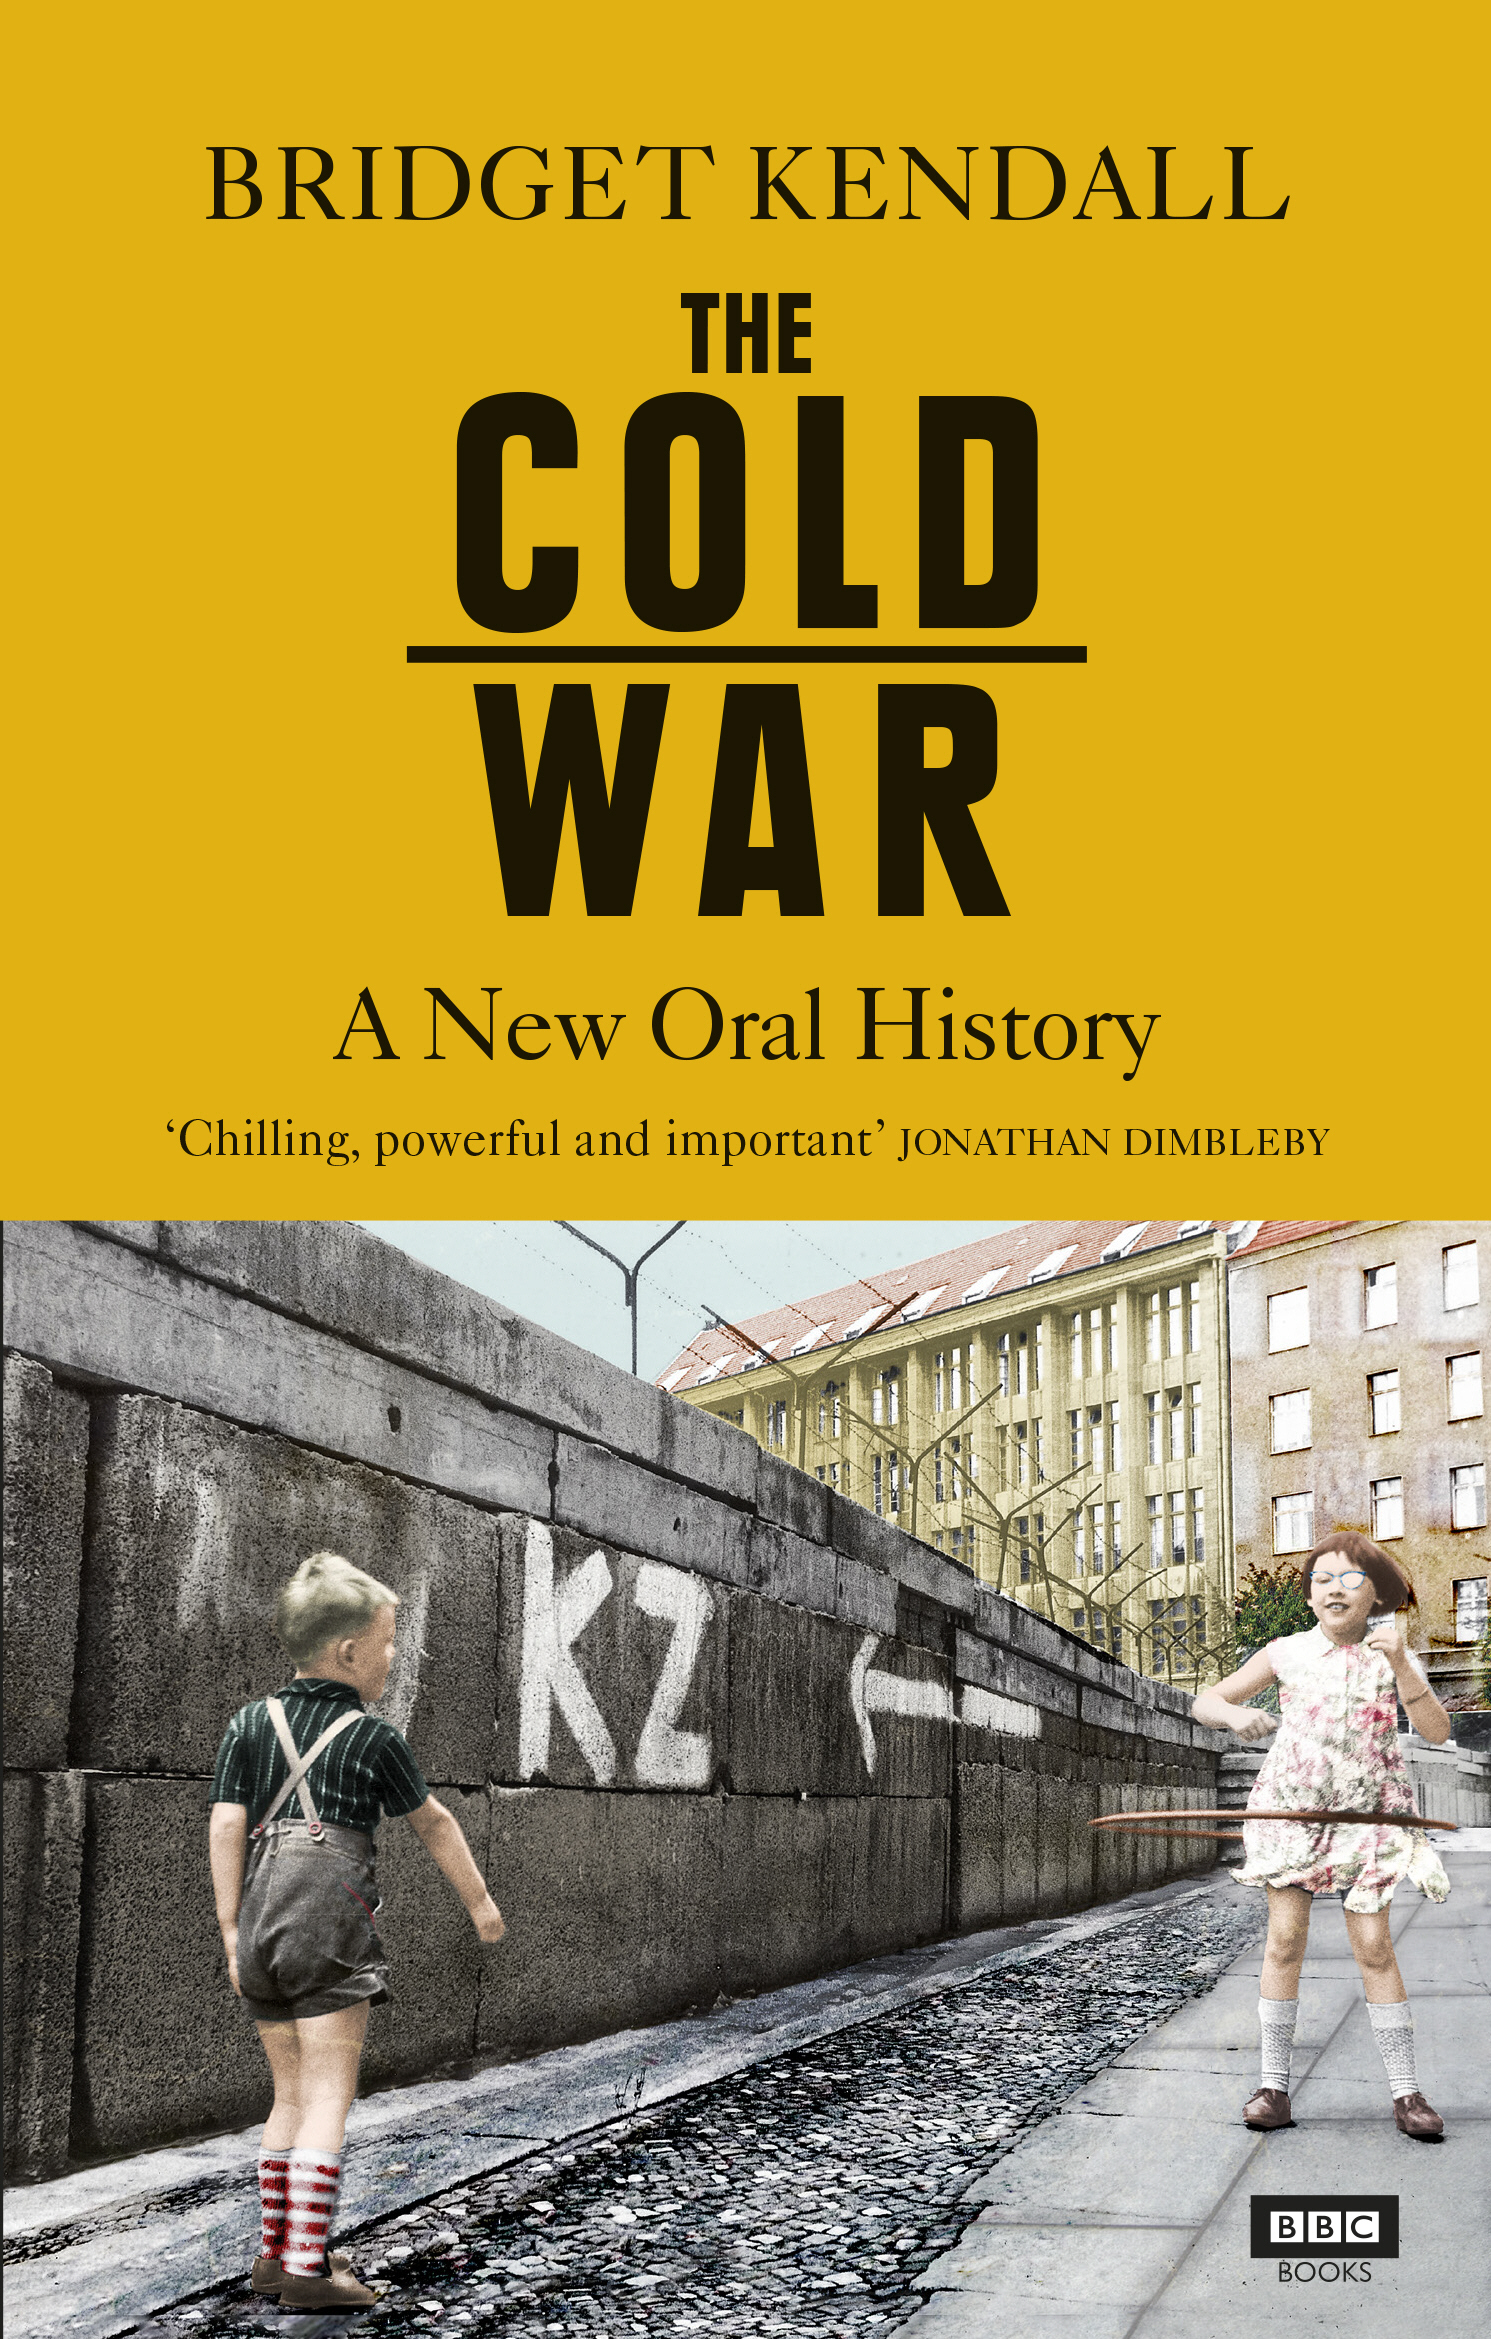 book review on cold war